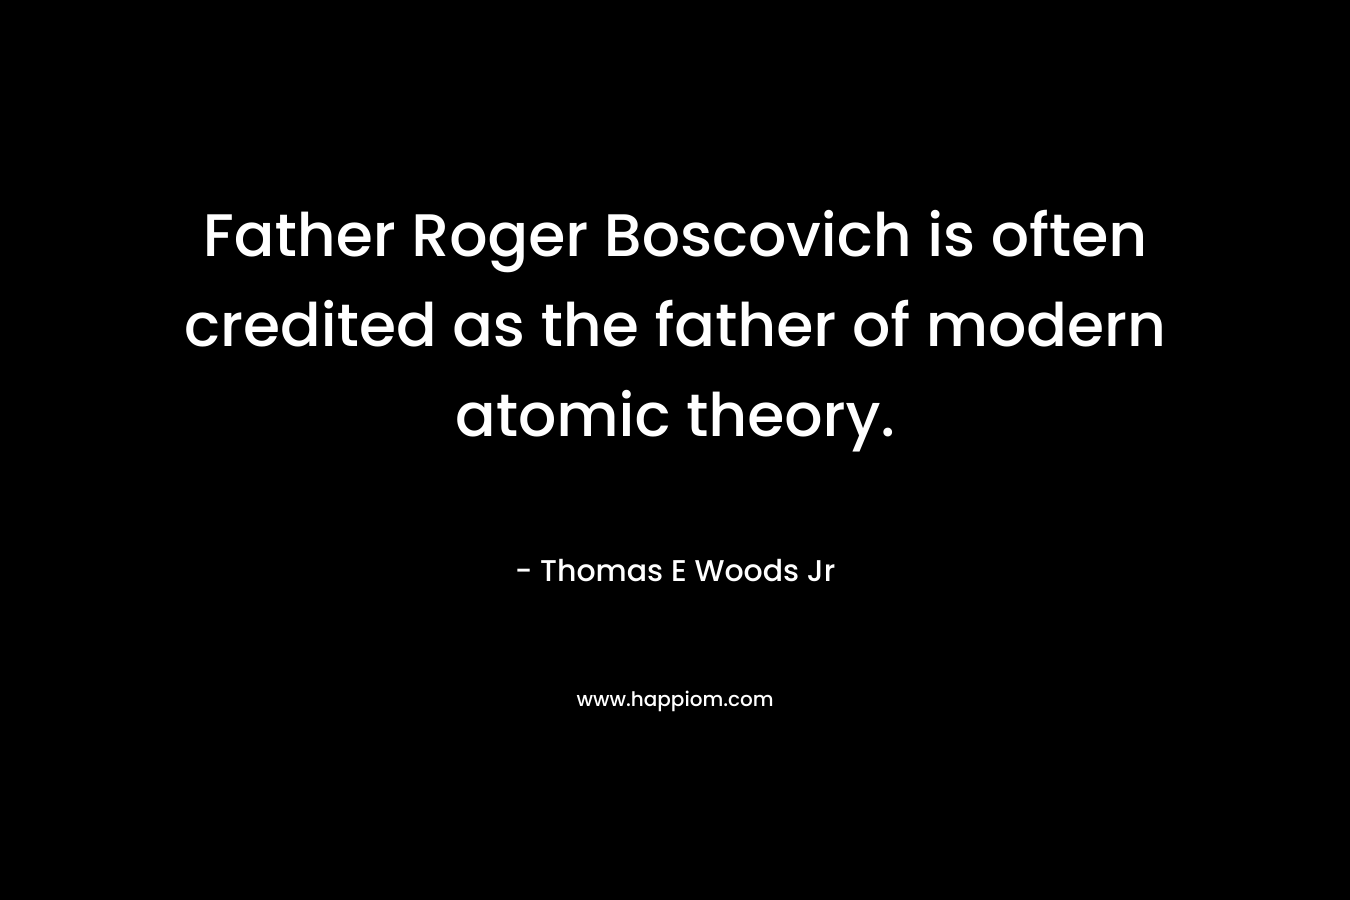 Father Roger Boscovich is often credited as the father of modern atomic theory.